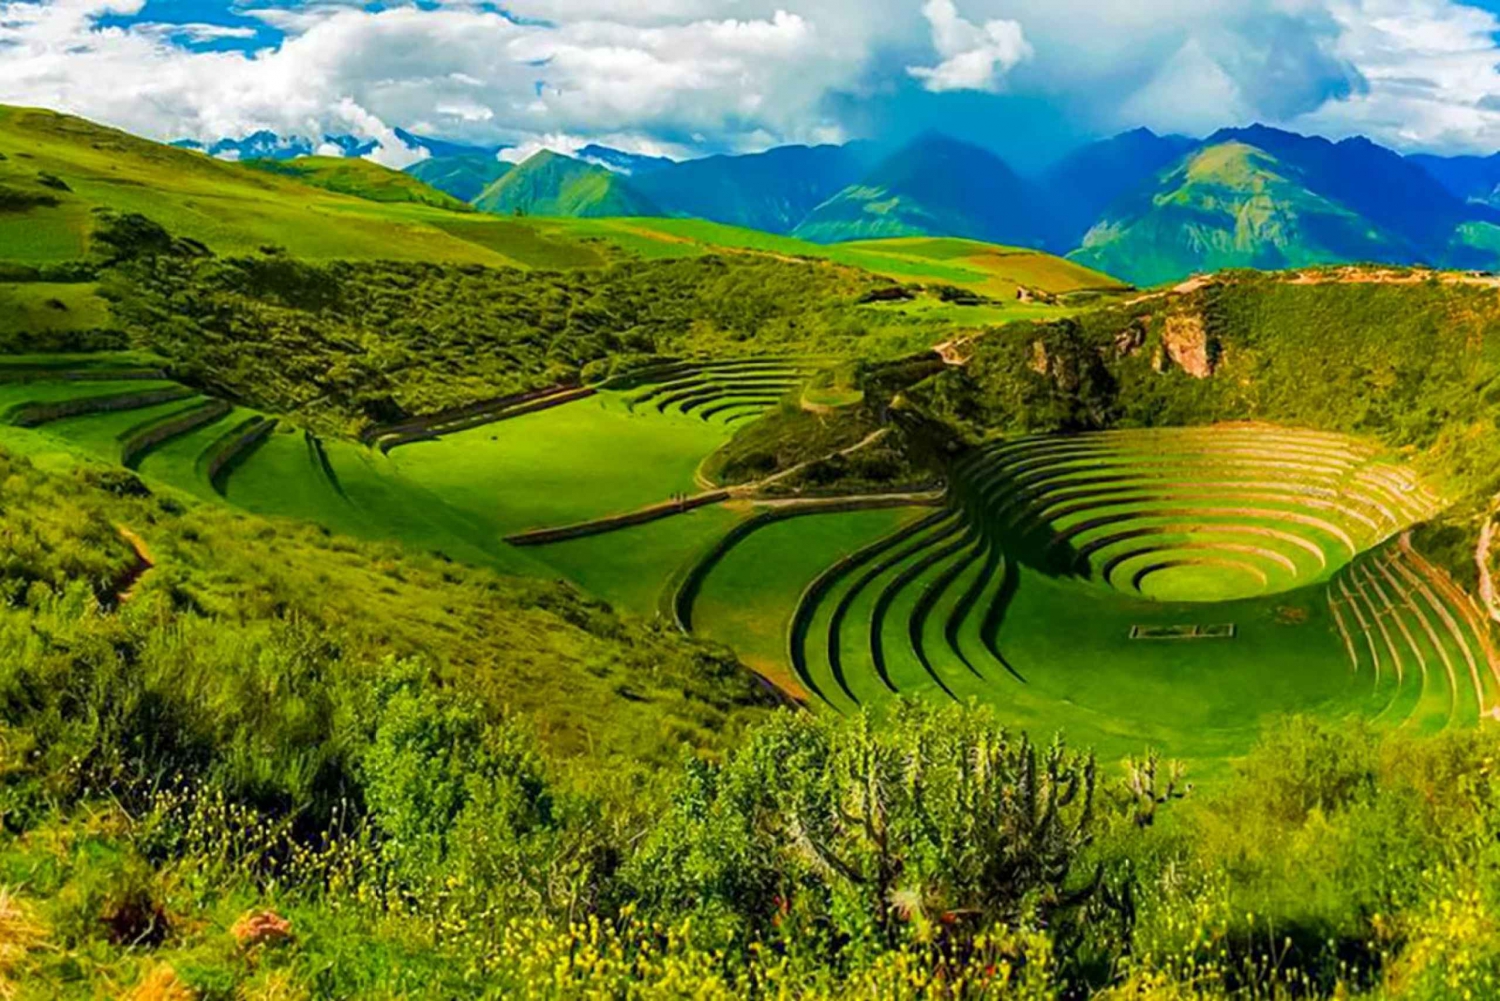 Maras Moray Sacred Valley Tour from Cusco